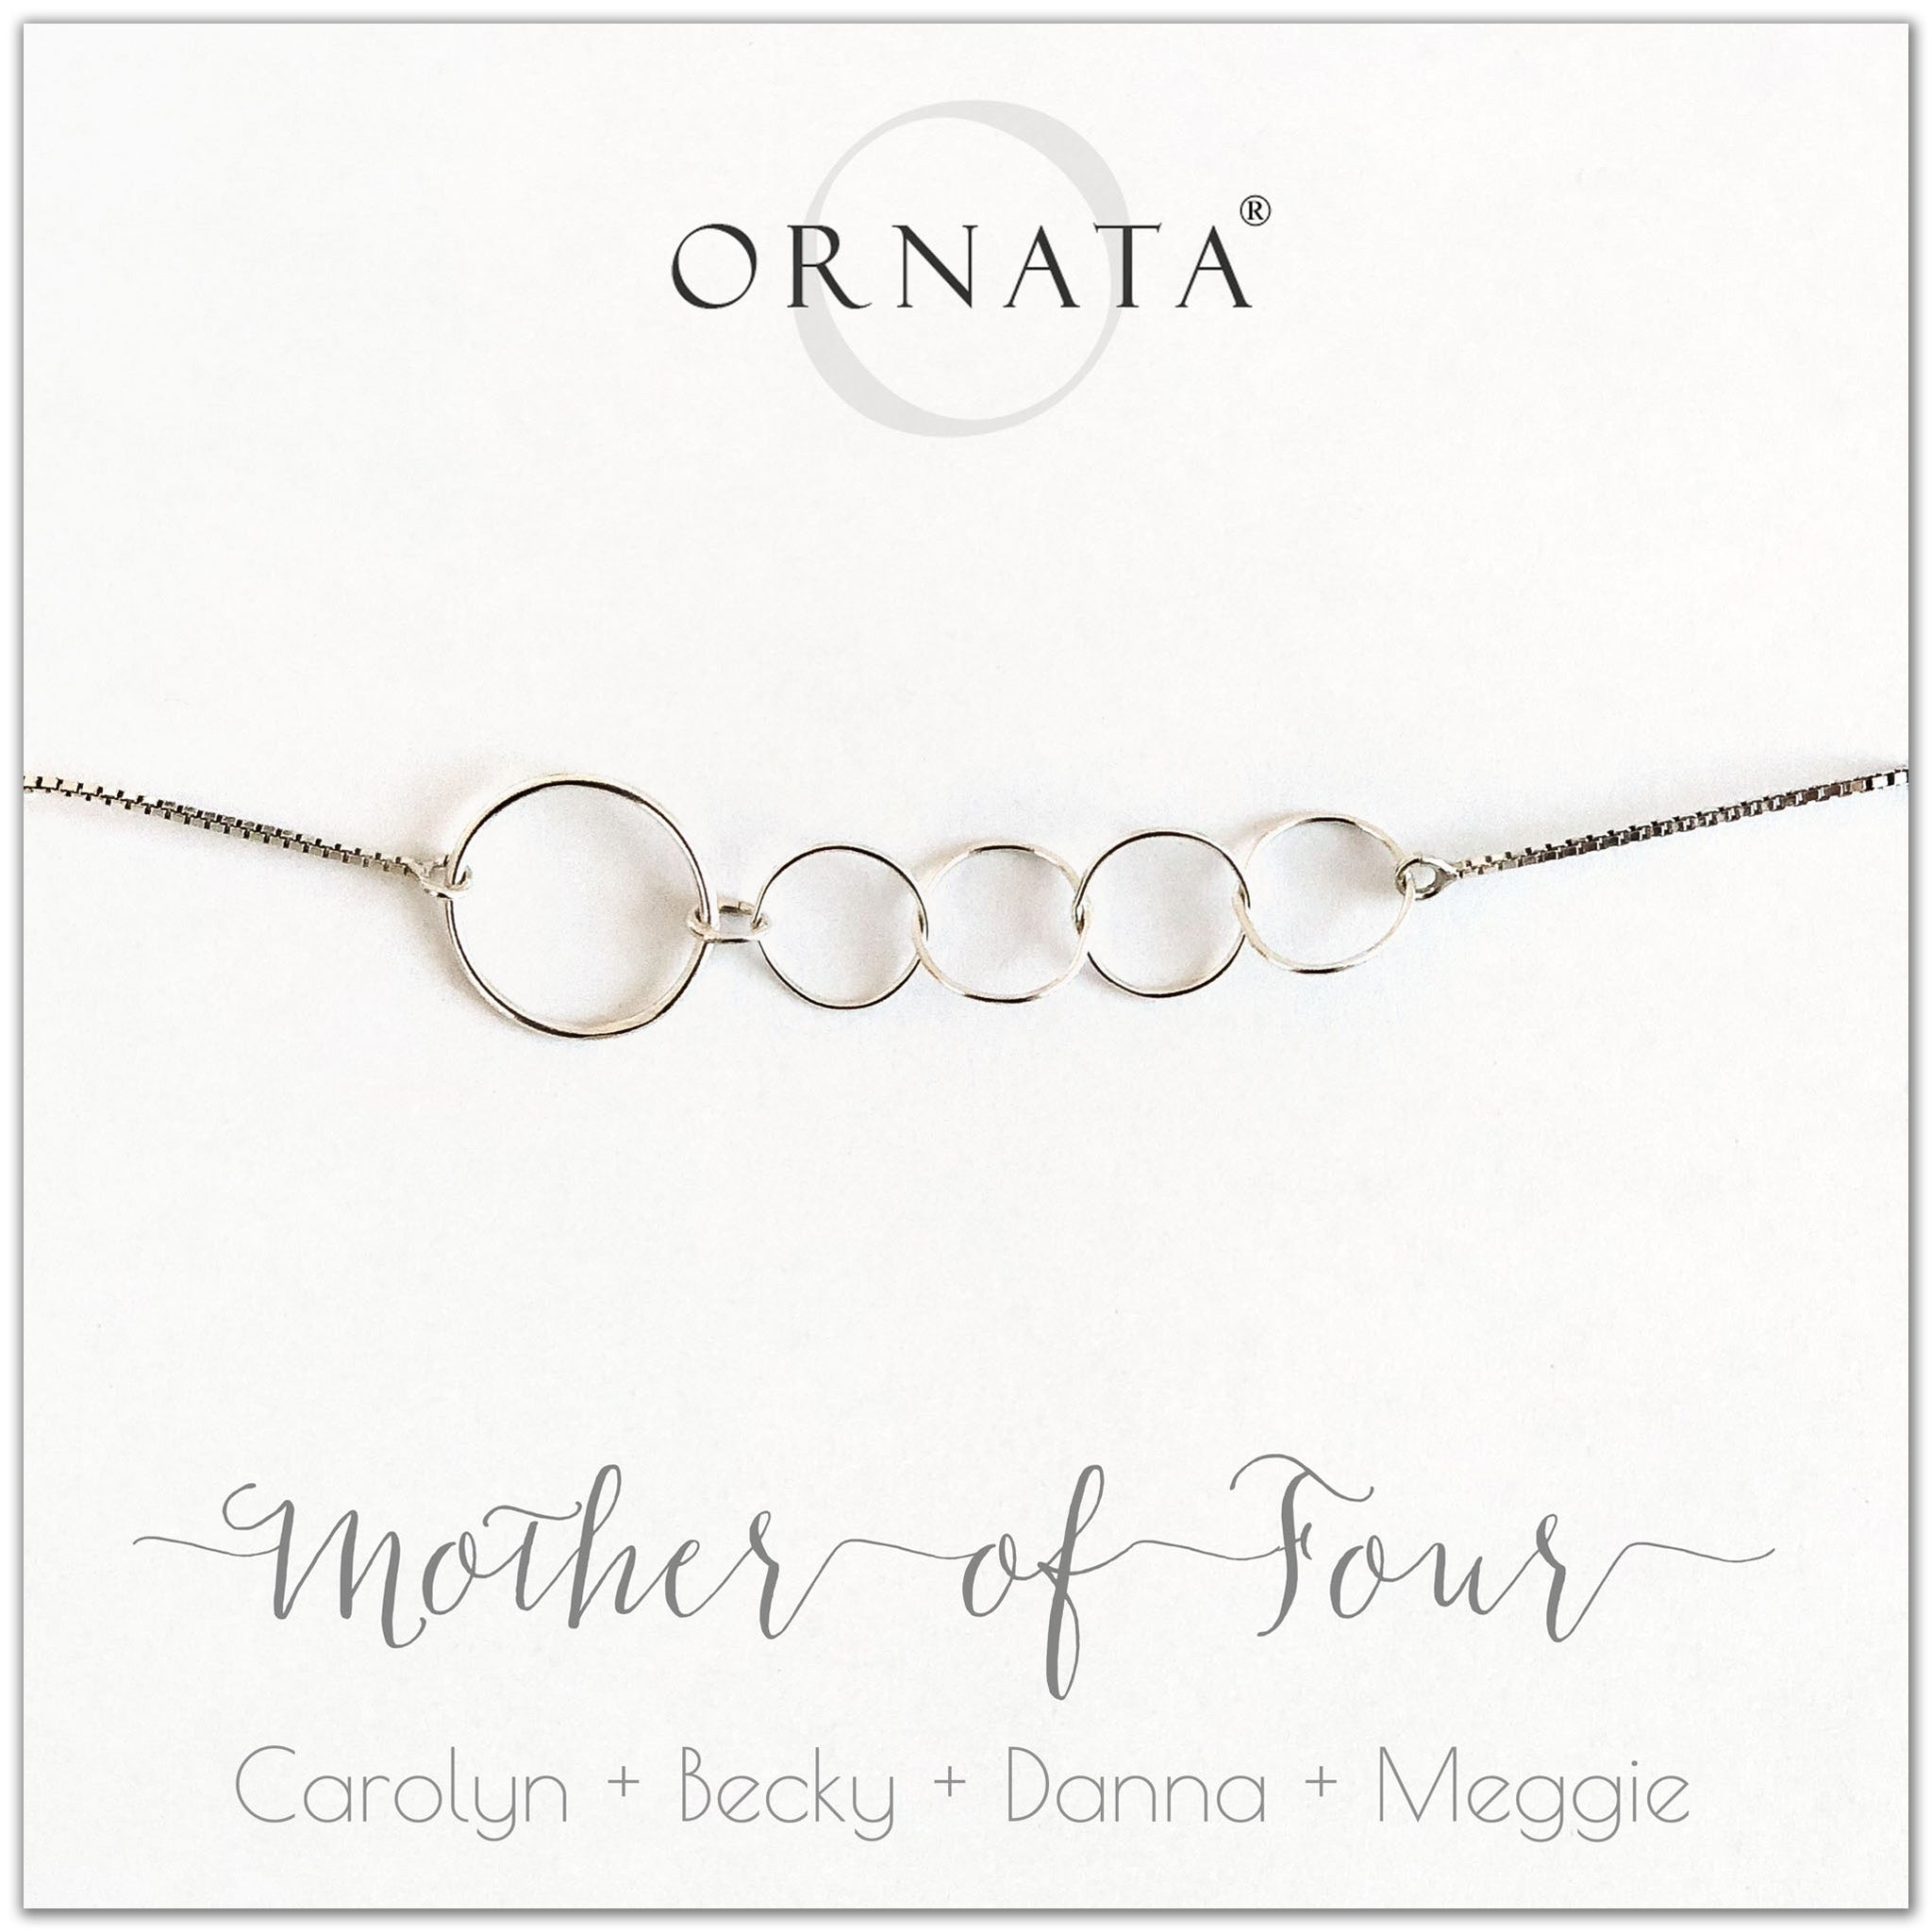 Mother of four personalized sterling silver bolo bracelet. Our custom bracelets make good gifts for moms and family. Great mother’s day gift.